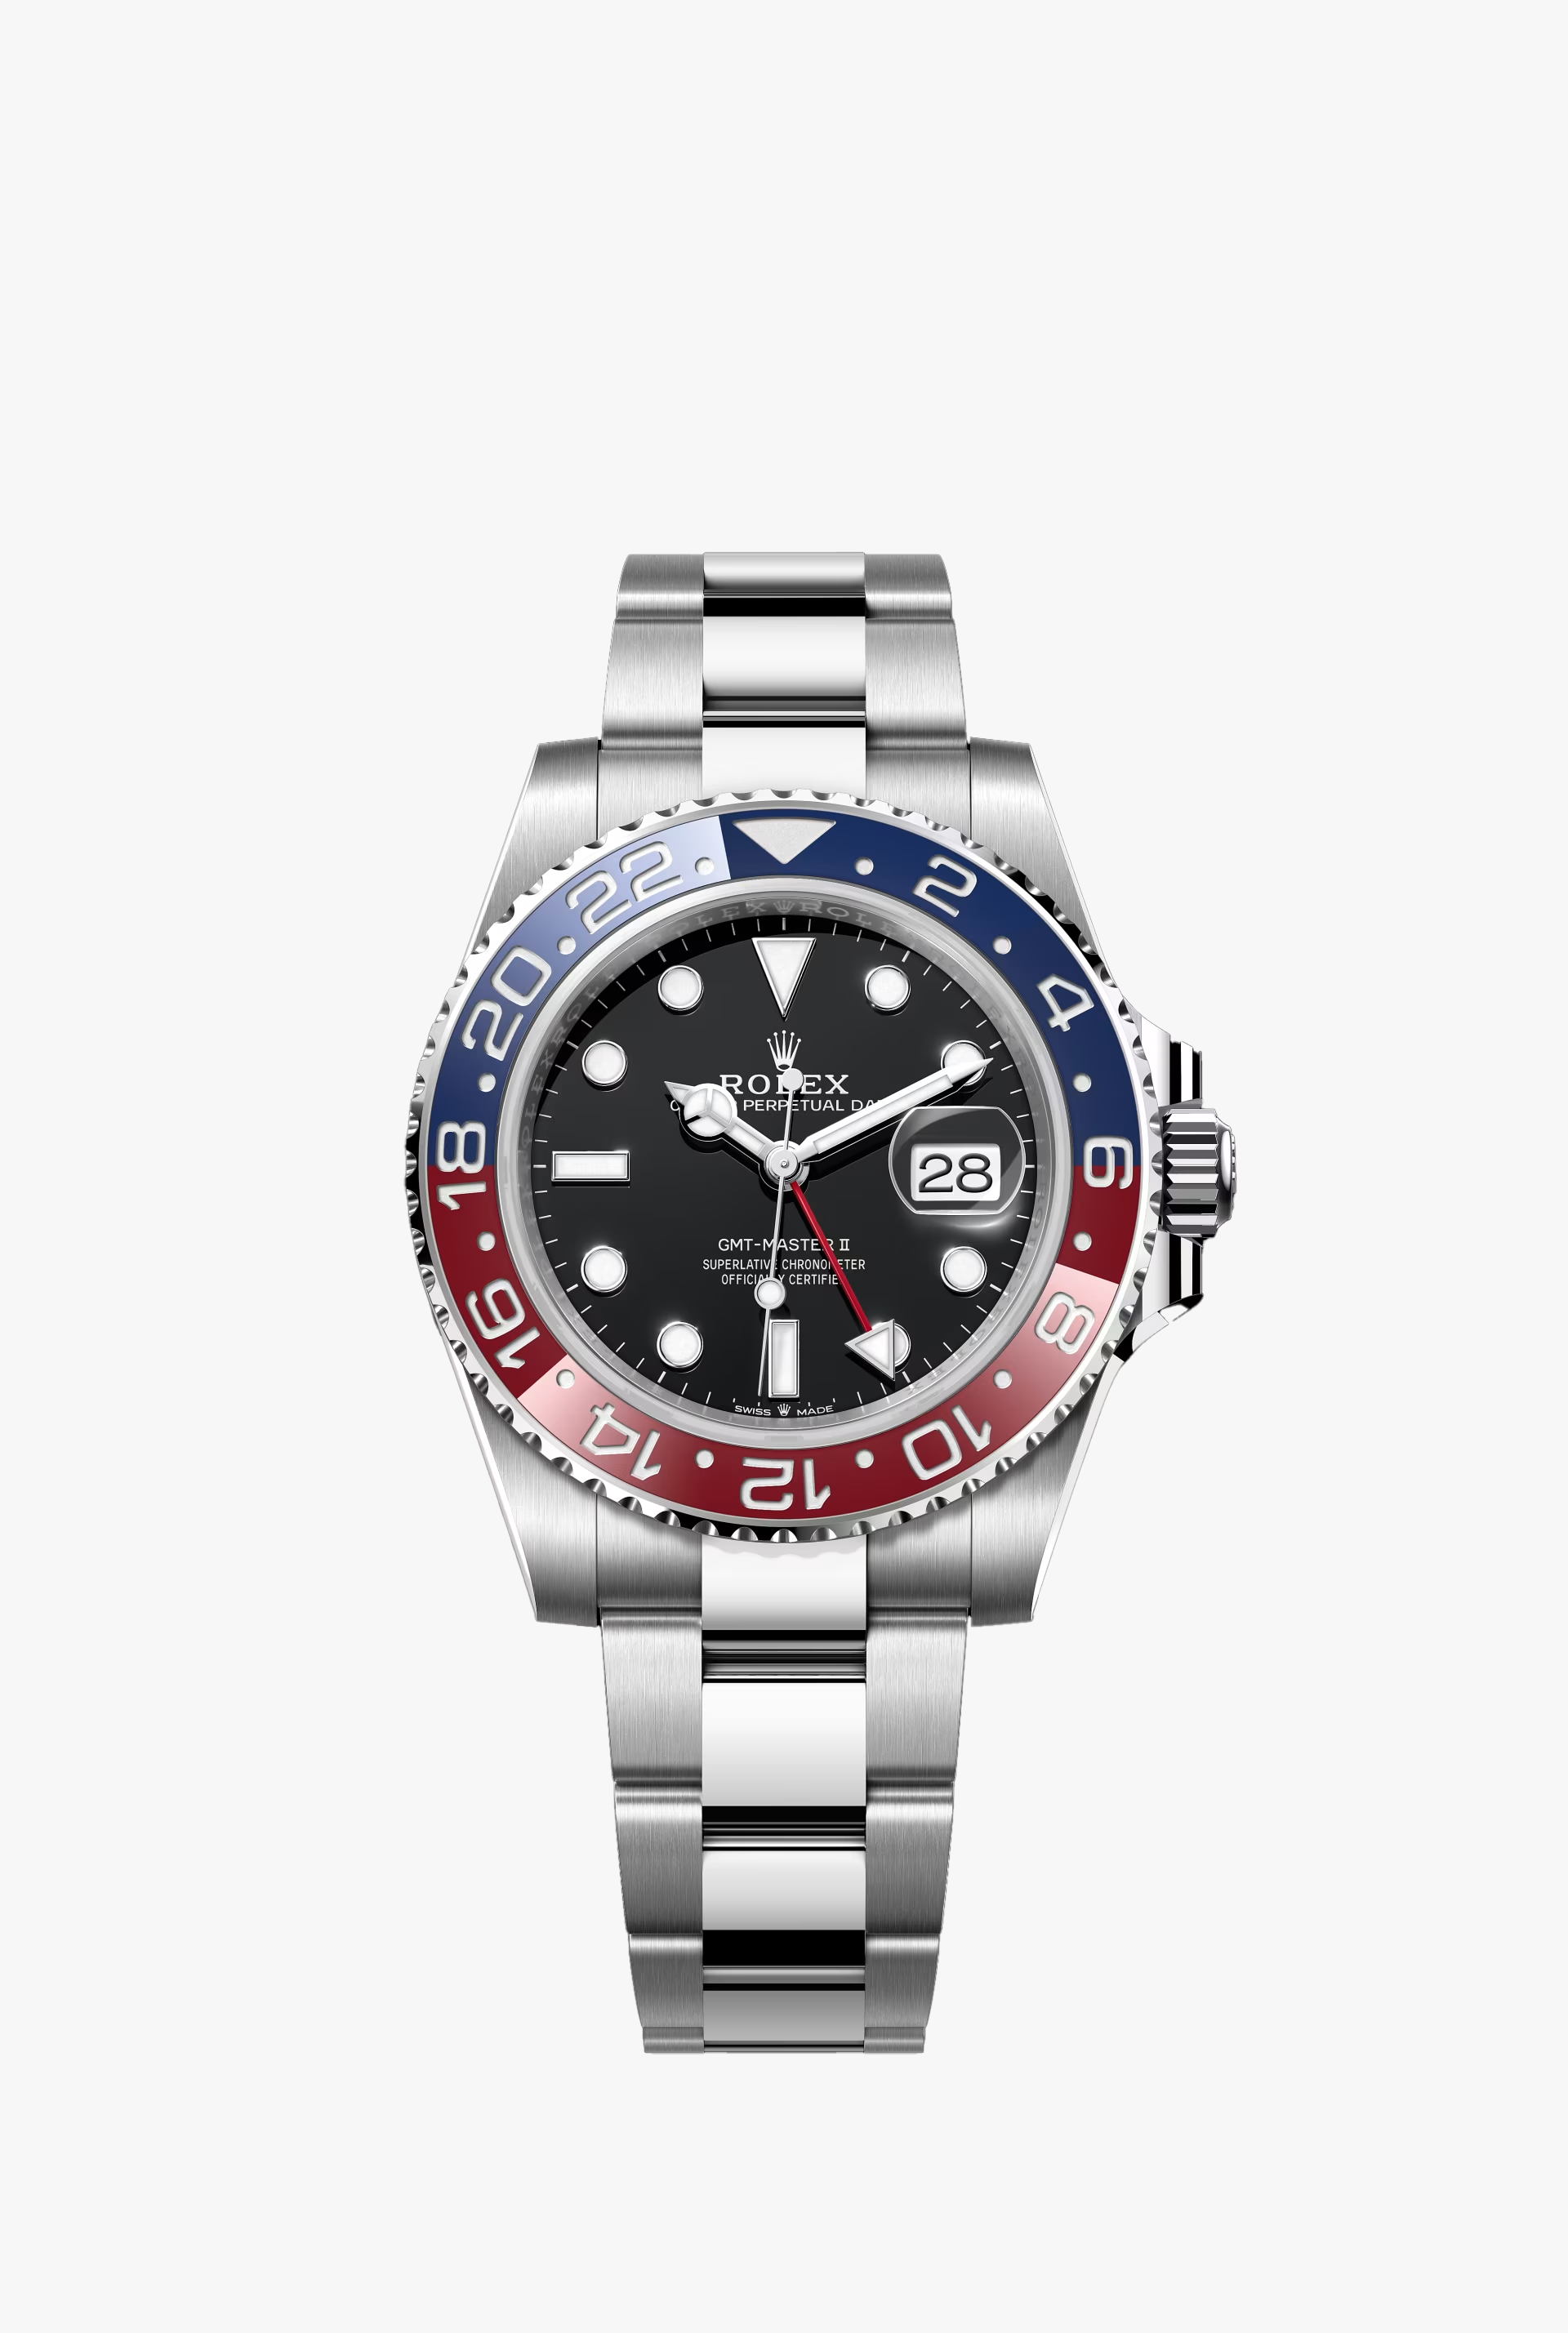 Rolex GMT-Master l Oyster,40 mm, Oystersteel Reference126710BLRO